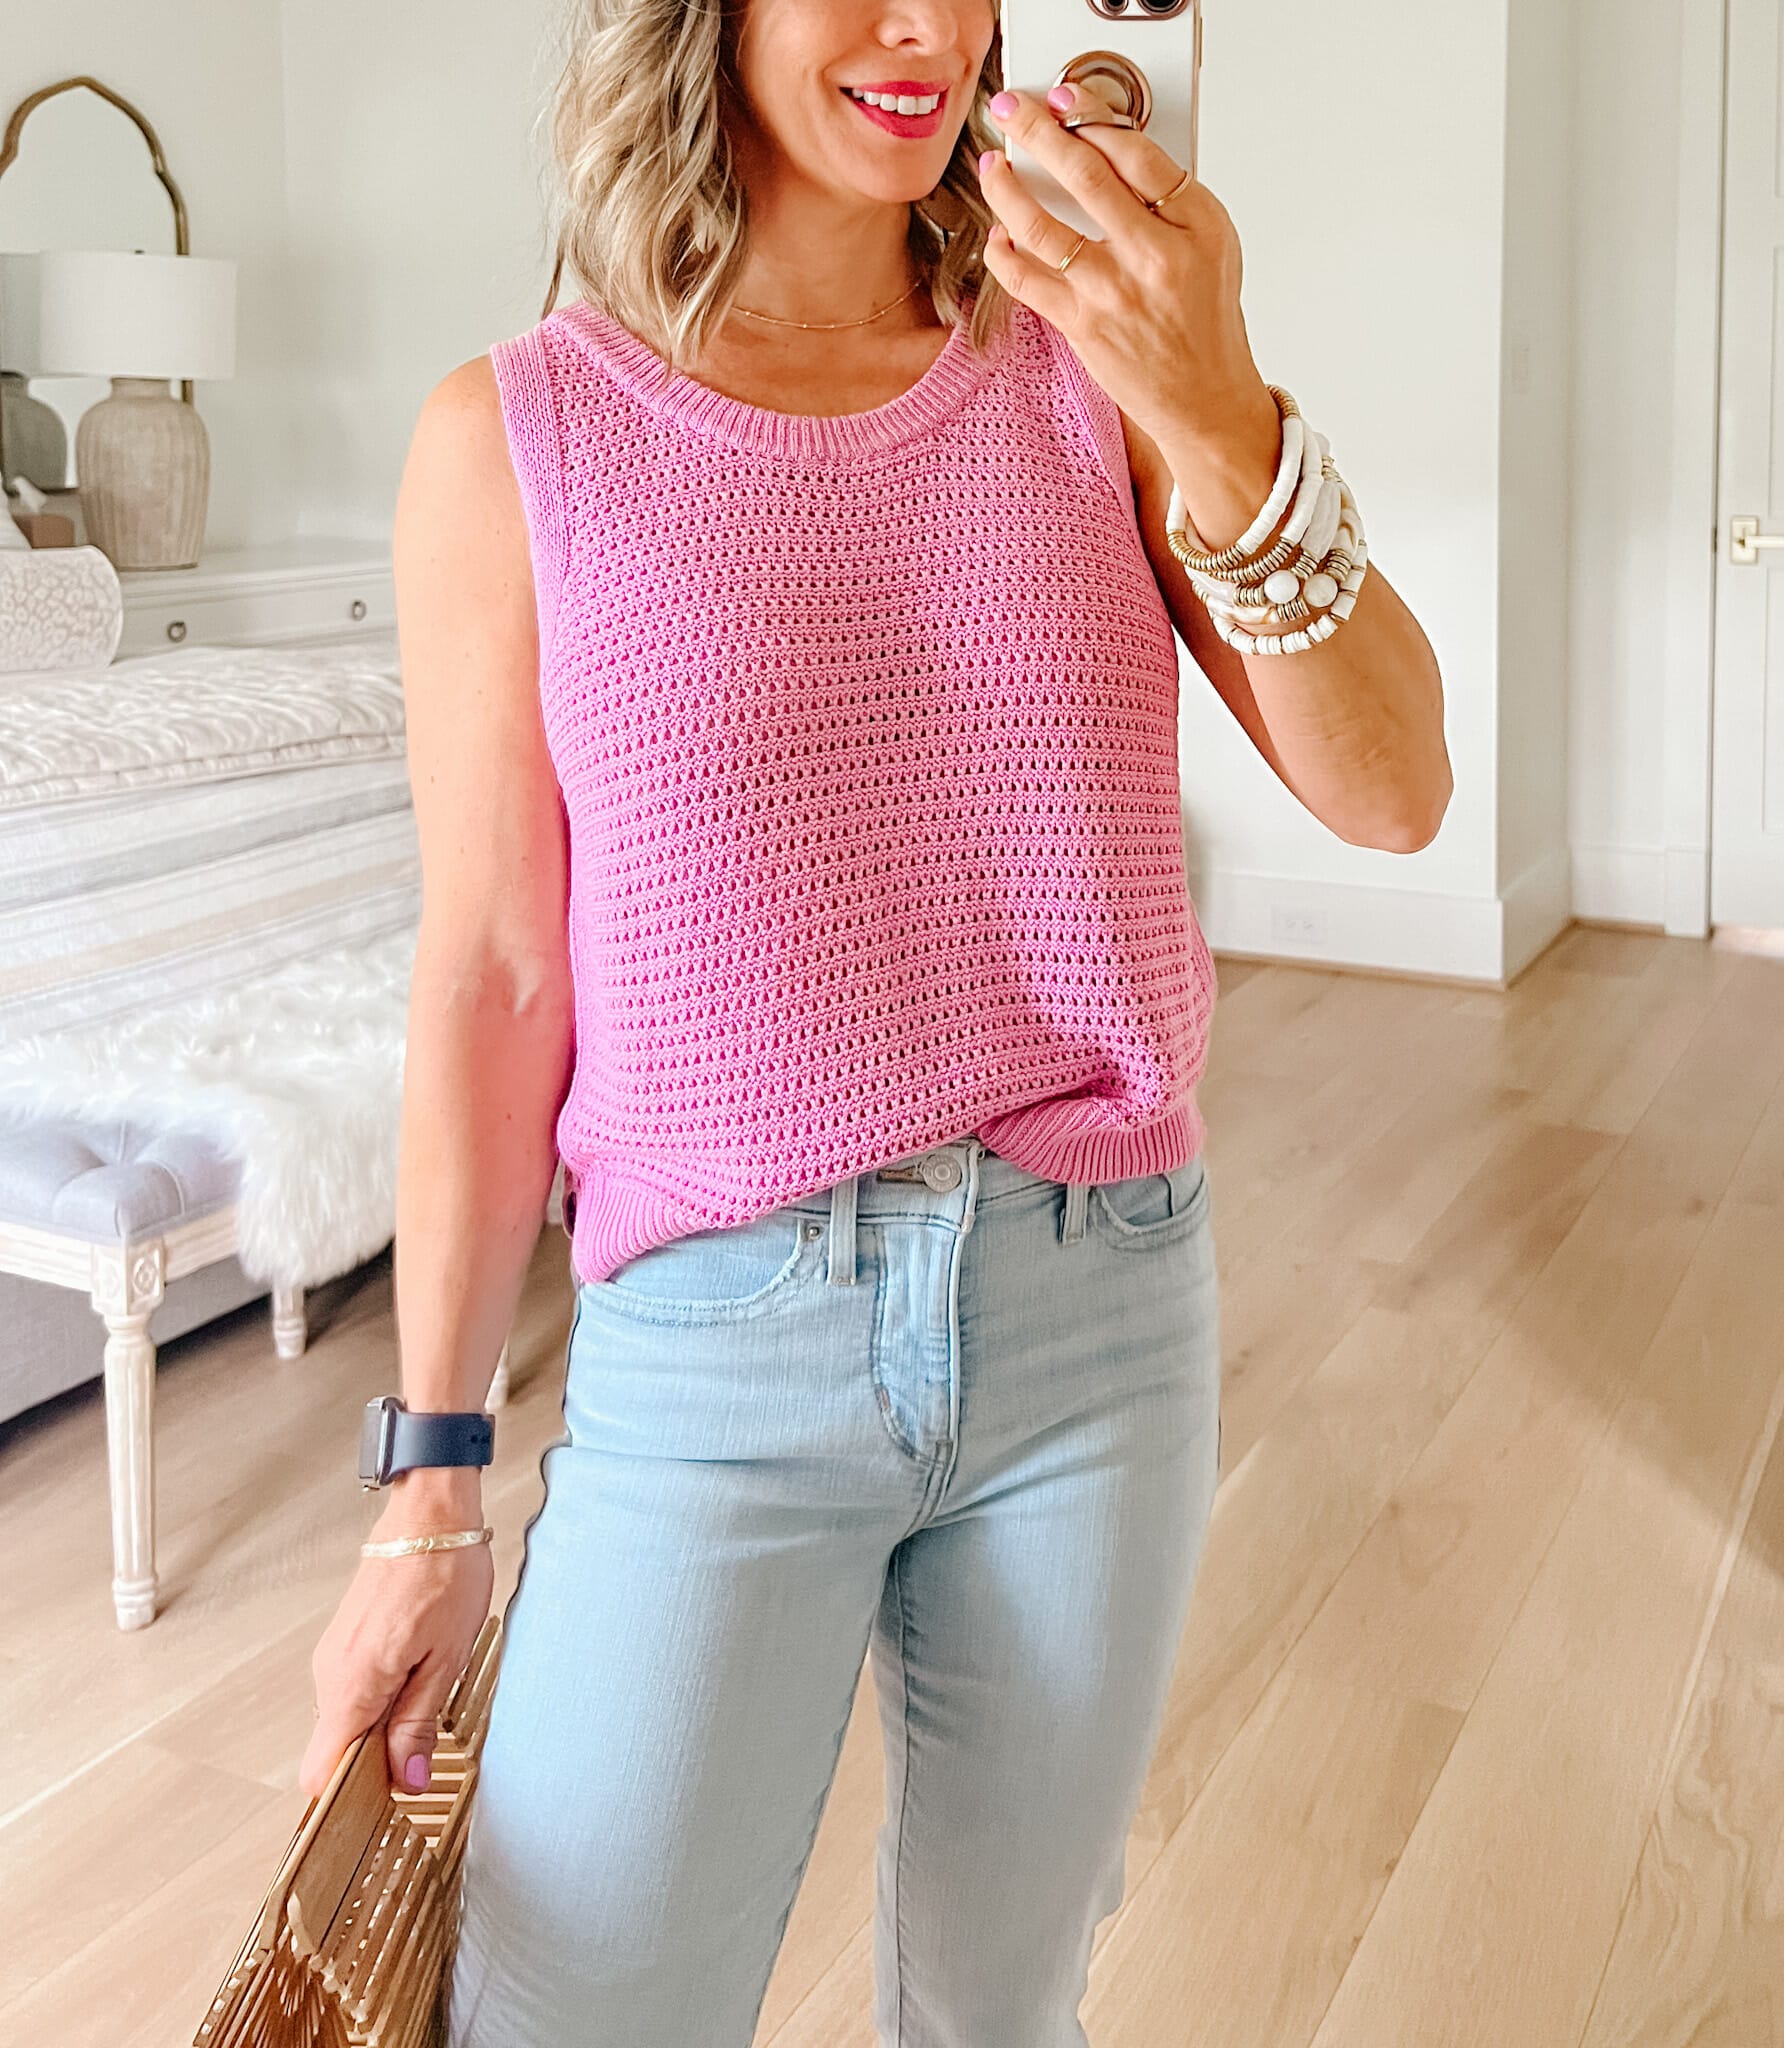 Sweater Tank, Jeans,Wedges, Bamboo Clutch 